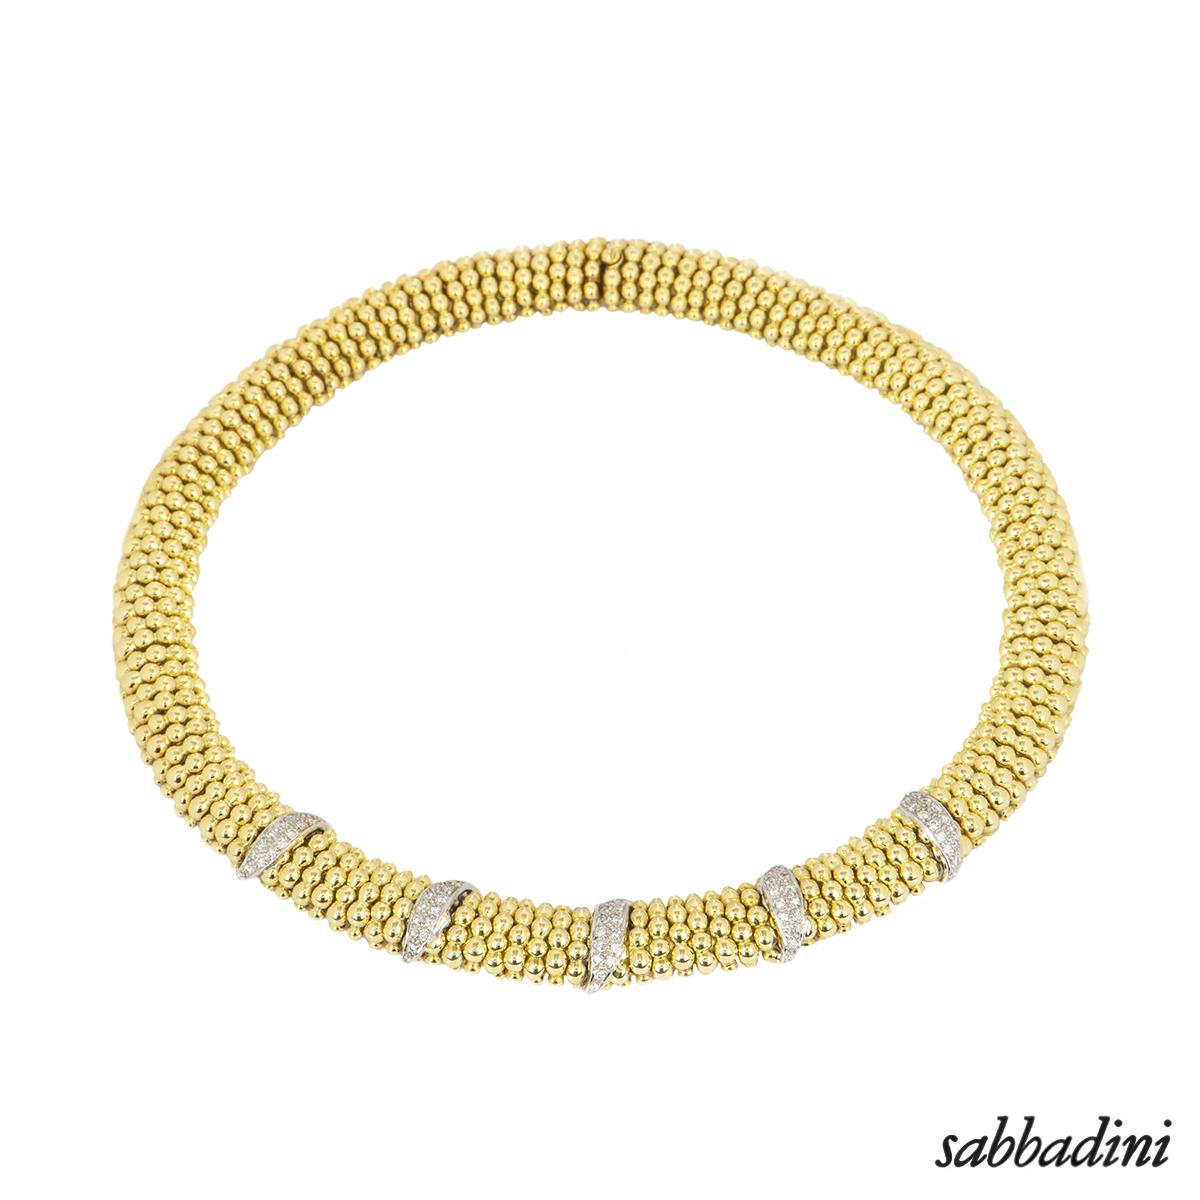 An 18k yellow gold diamond suite by Sabbadini. The suite consists of a bracelet, necklace and a pair of earrings pave set with round brilliant cut diamonds in a beaded ball design. The necklace features a total of 78 diamonds with an approximate